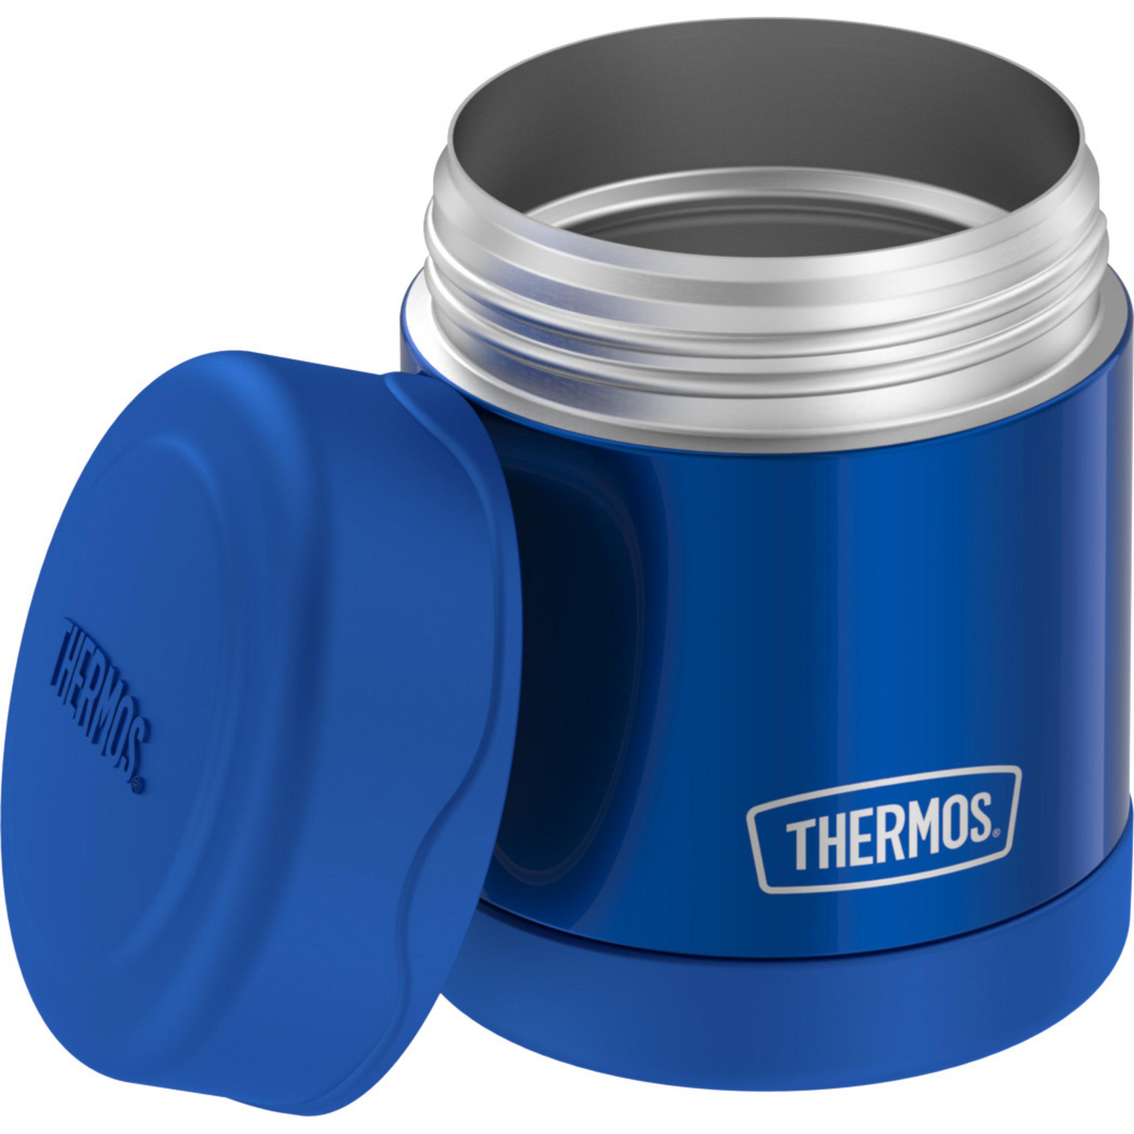 Thermos 10 Oz. Stainless Steel Food Jar, Lunch Bags, Sports & Outdoors